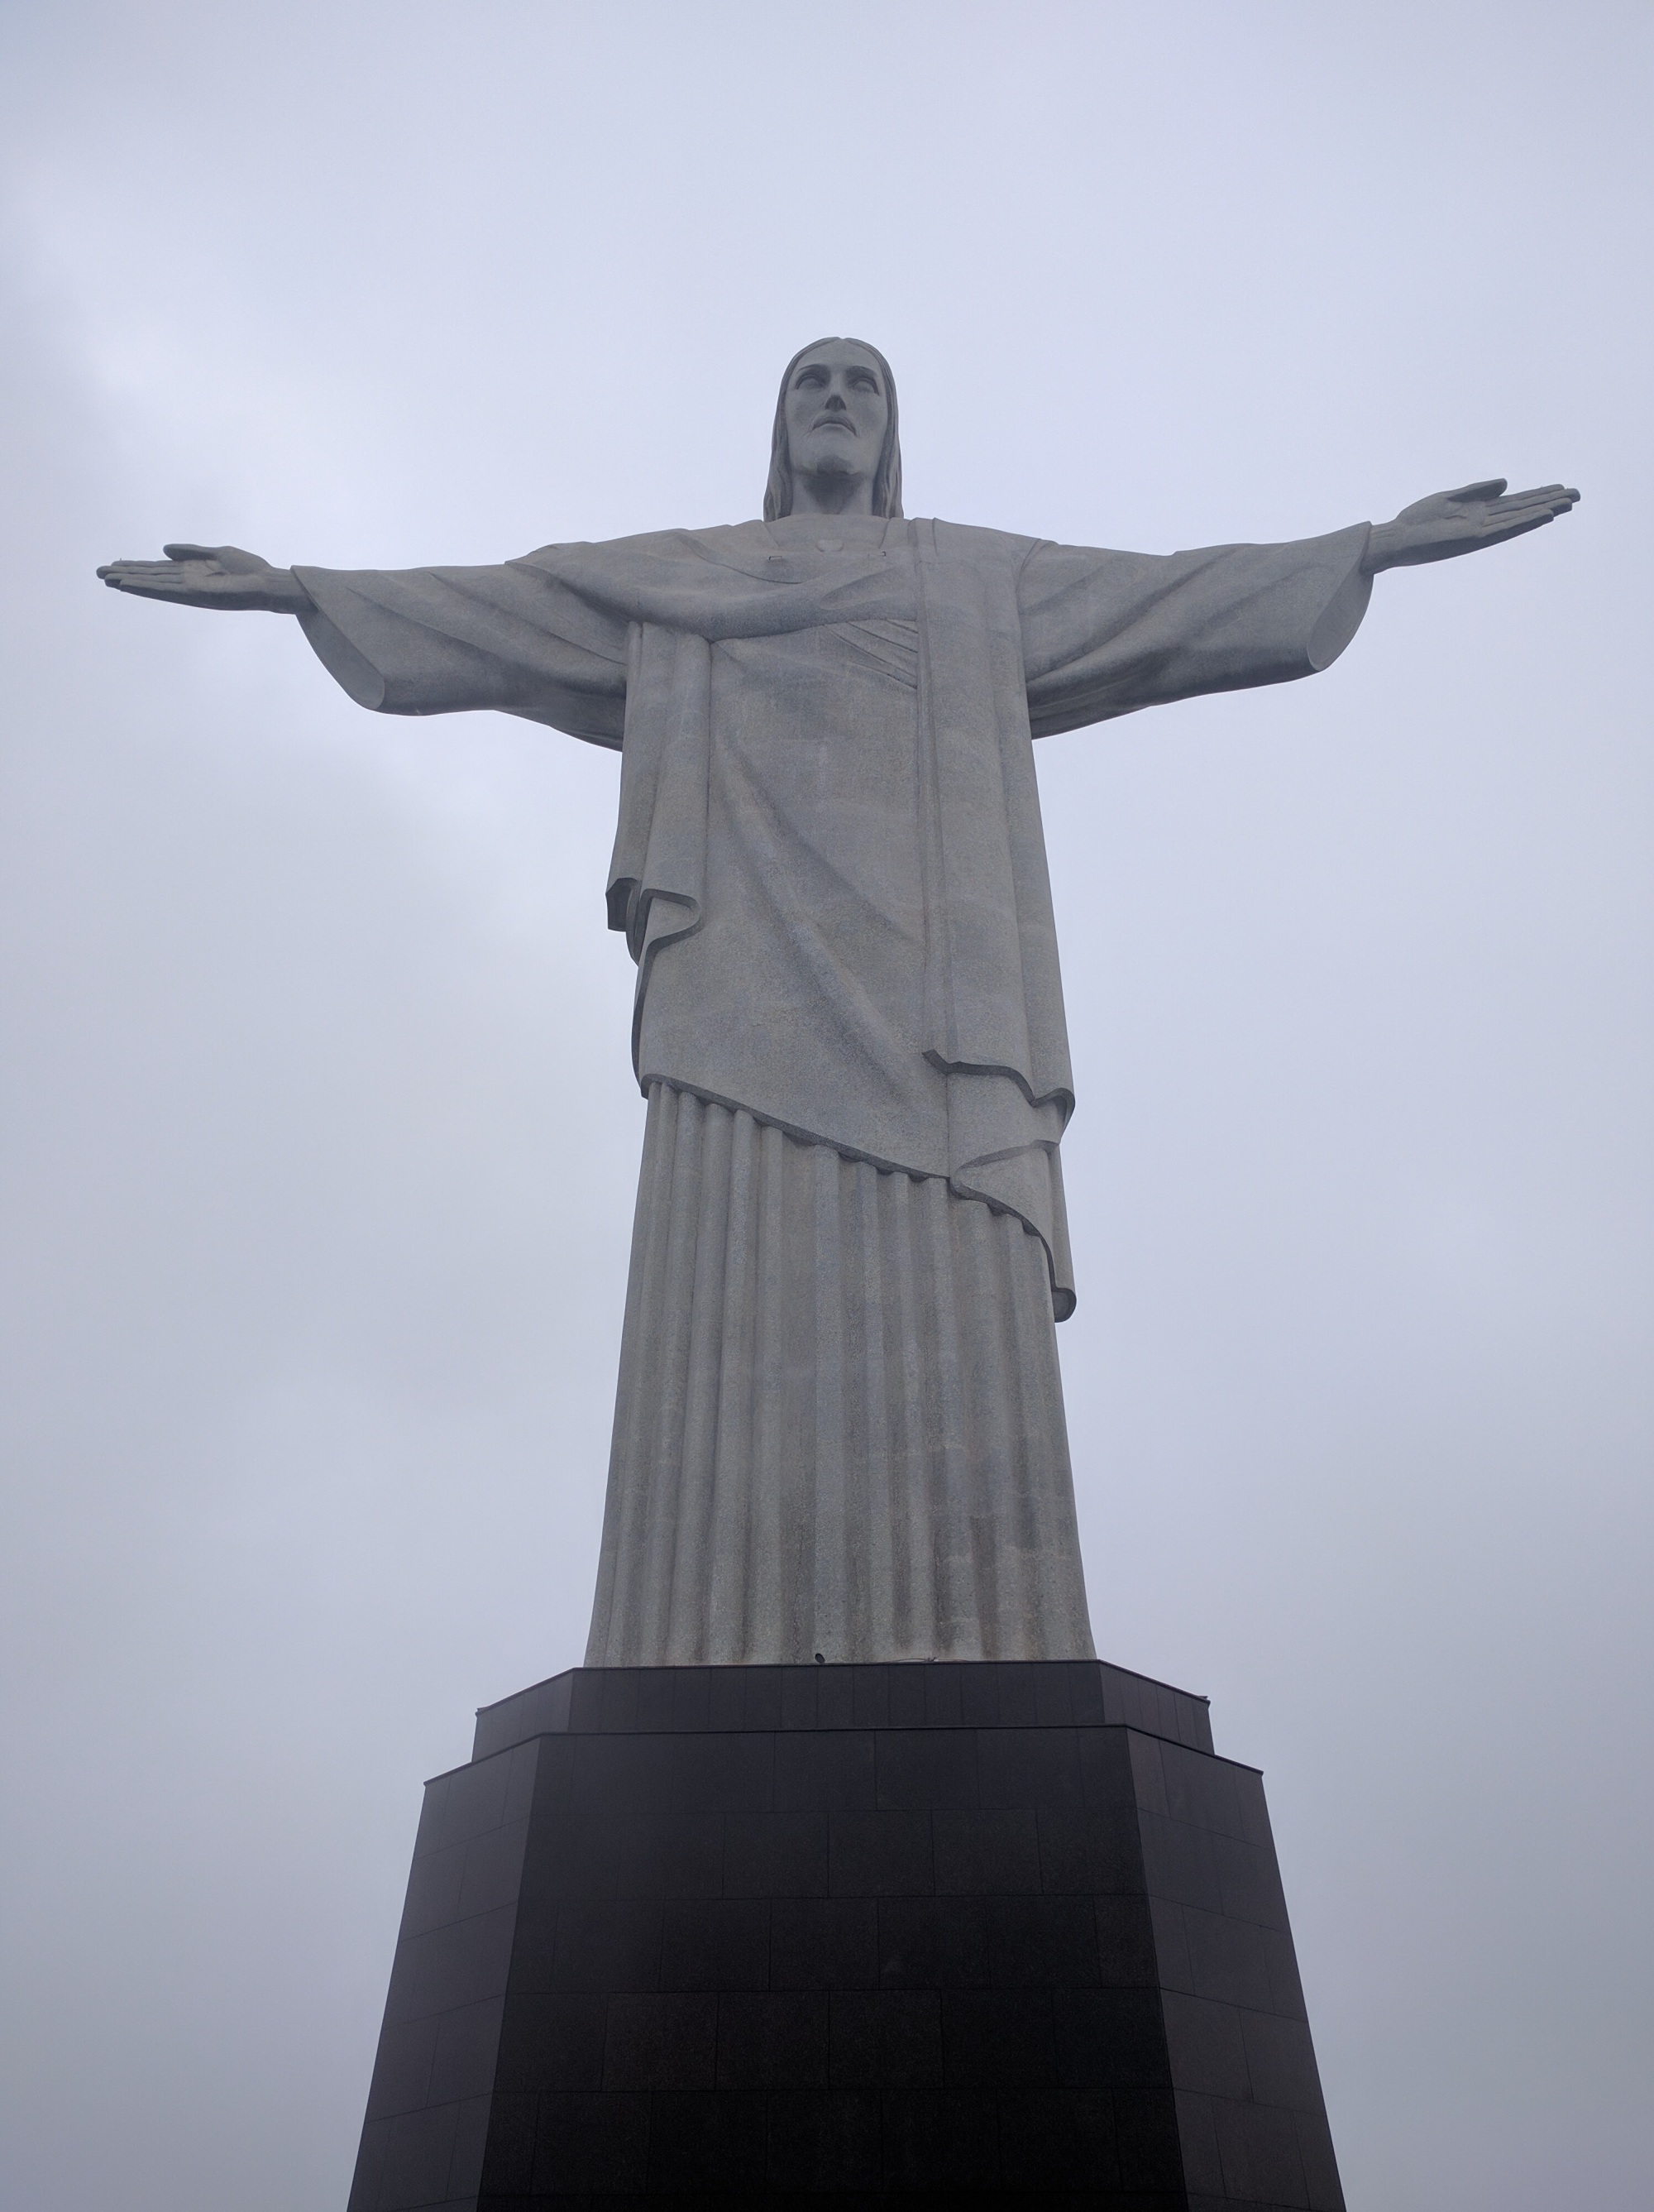 The weirdest thing about the Christ the Redeemer statue is not that it's often cloudy